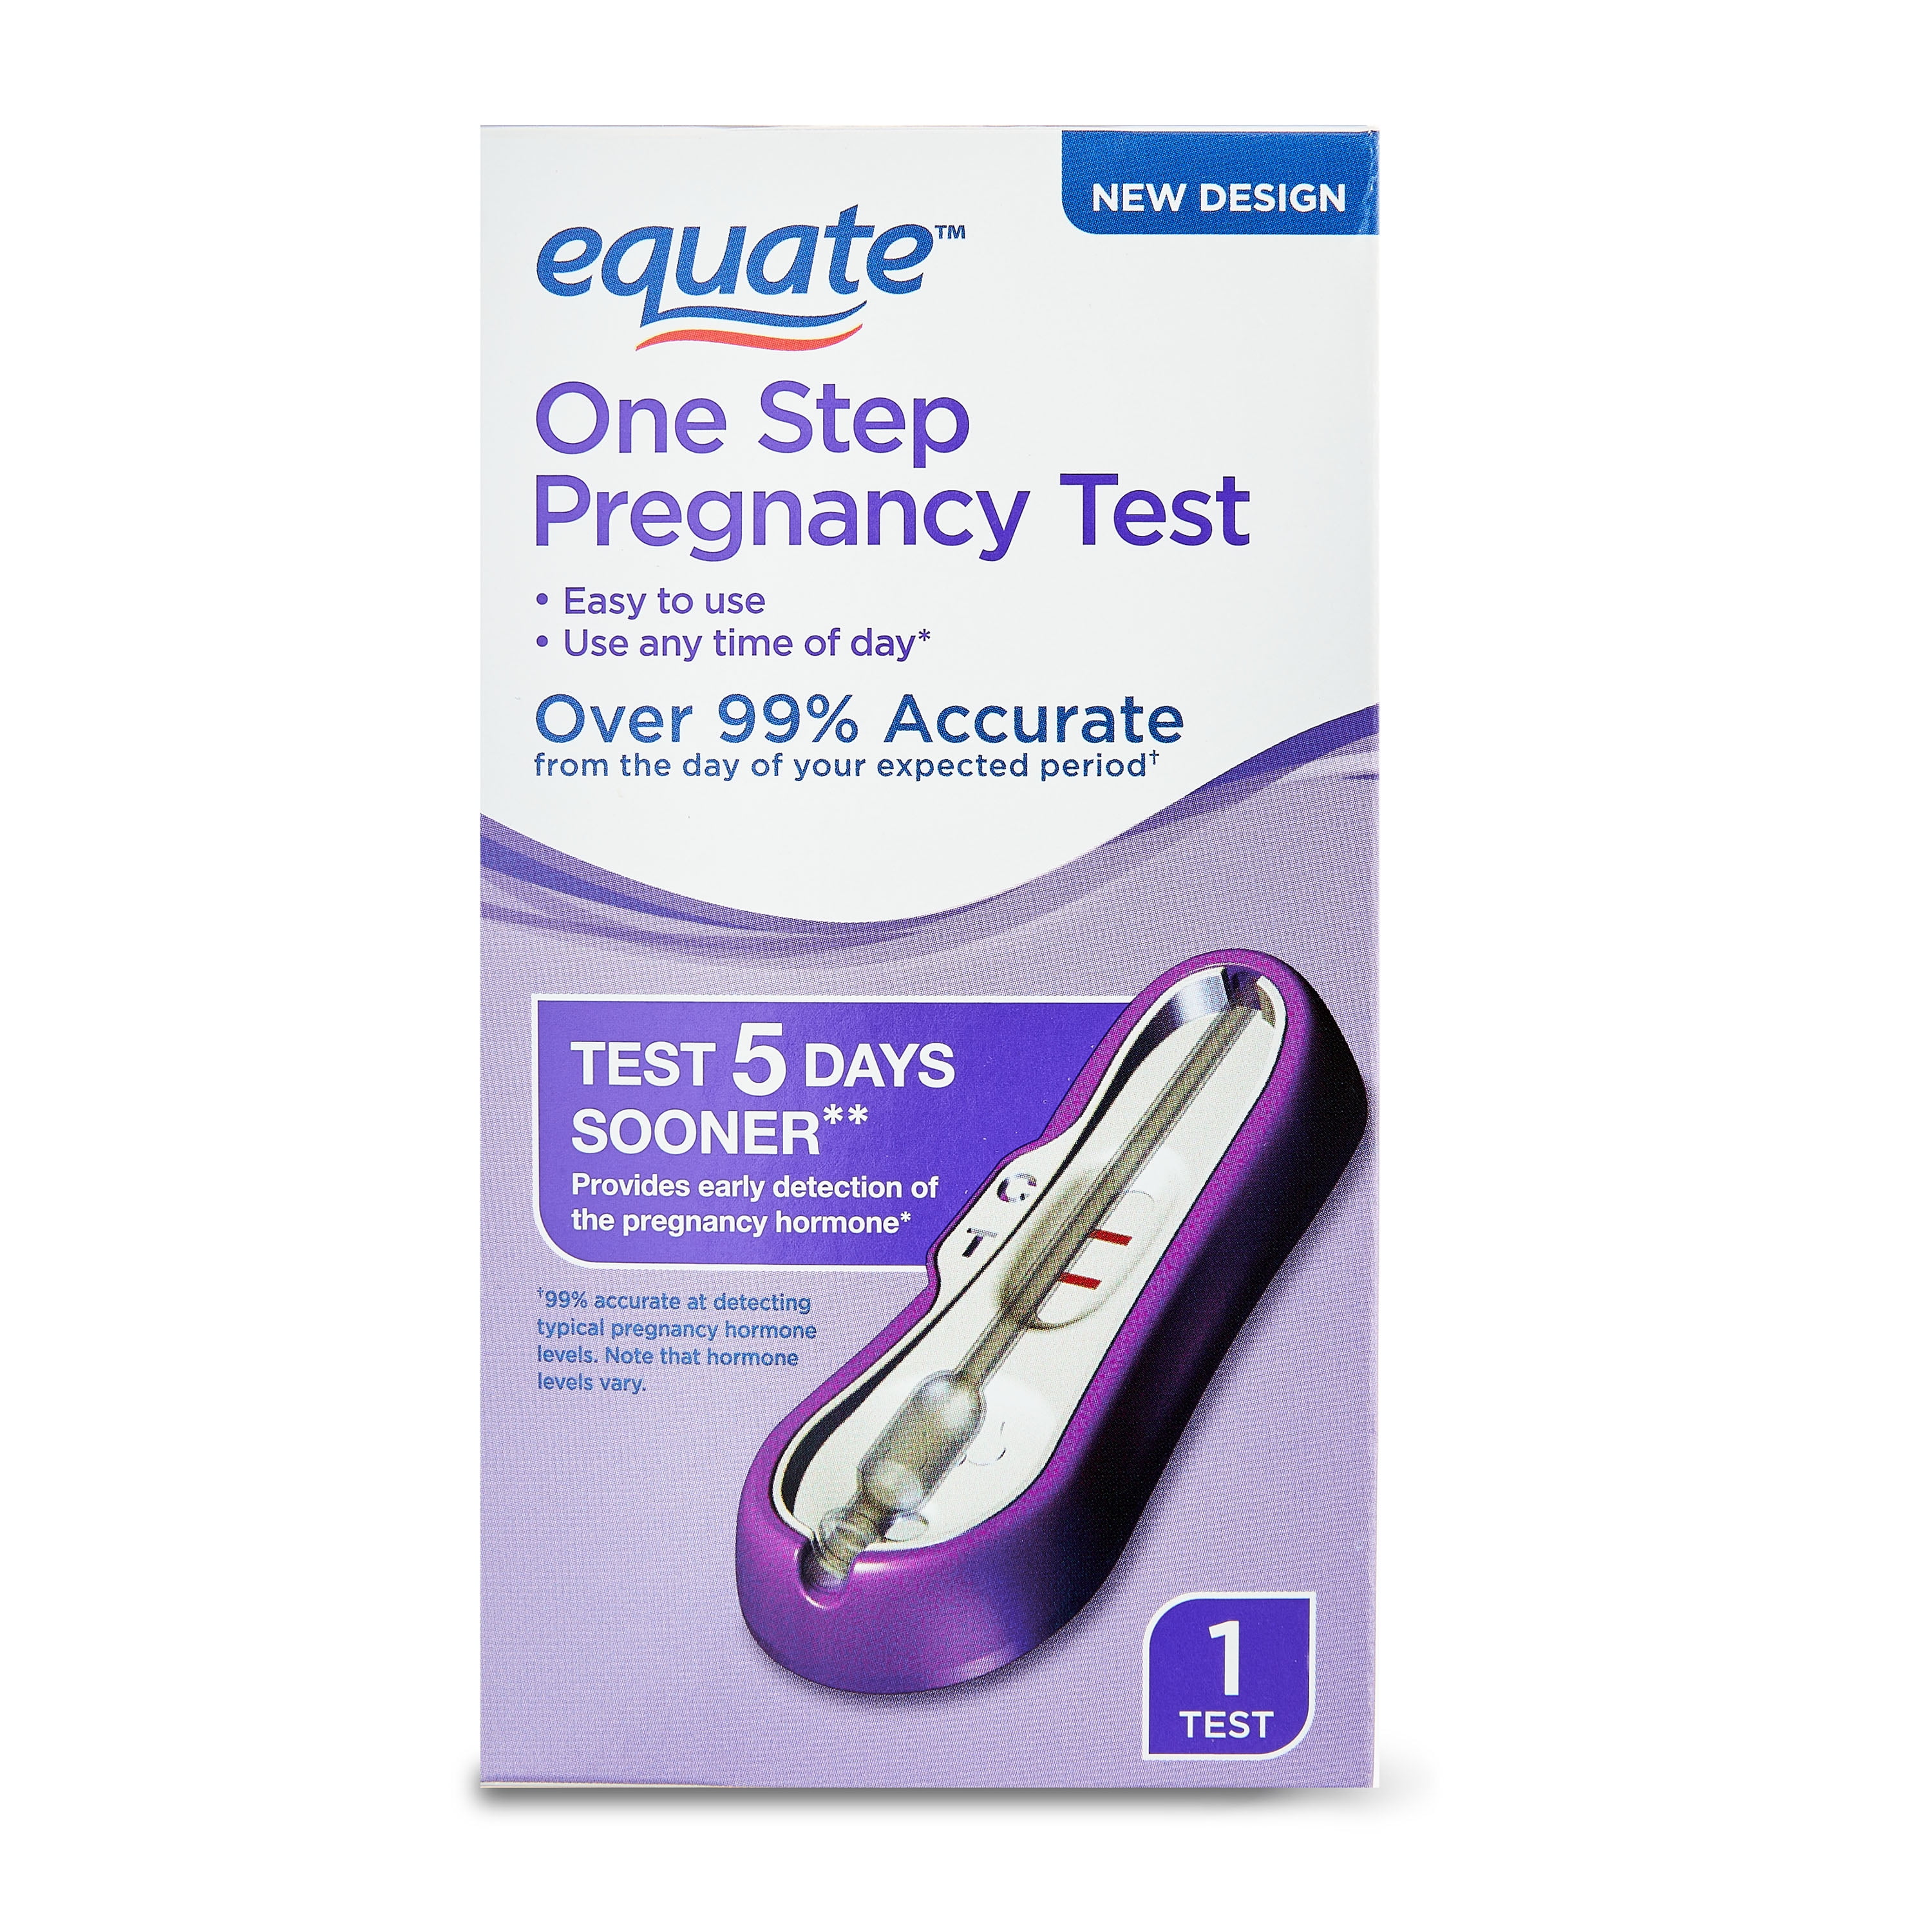 Equate First Signal One Step Pregnancy Test 